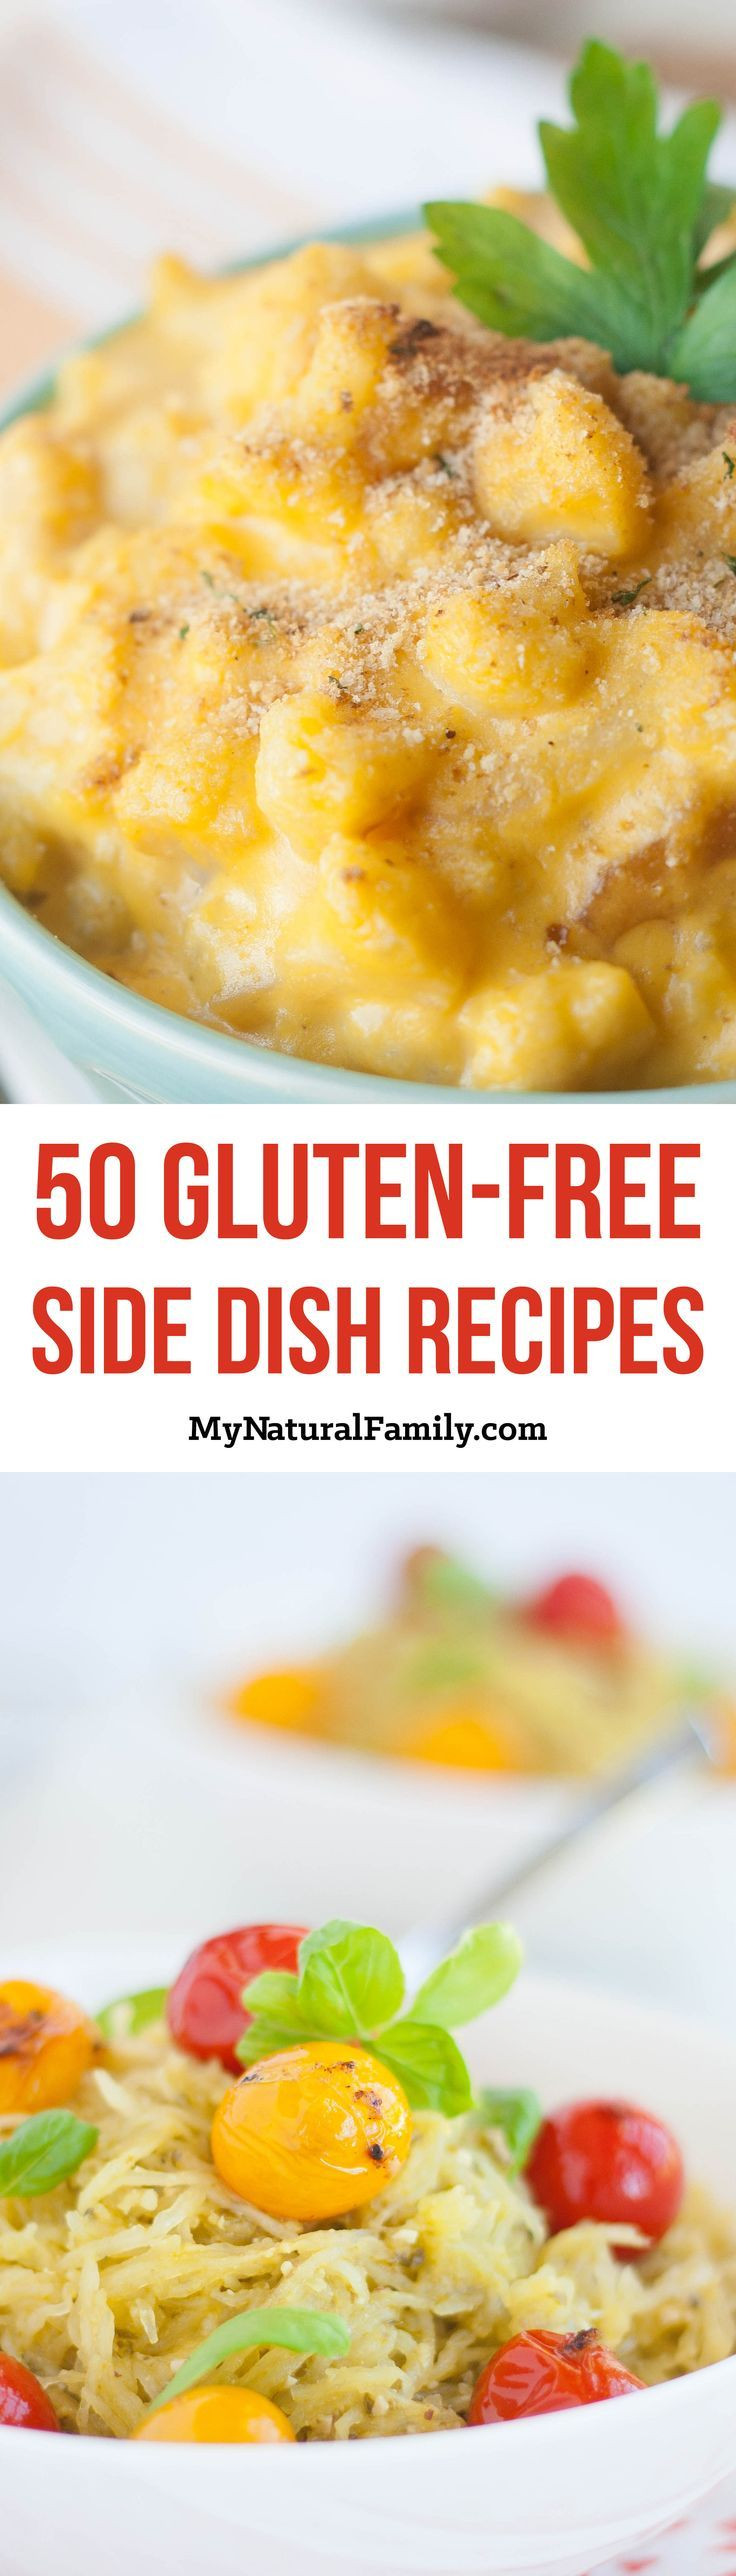 Dairy Free Side Dishes
 1000 images about Is It Really Gluten Free on Pinterest